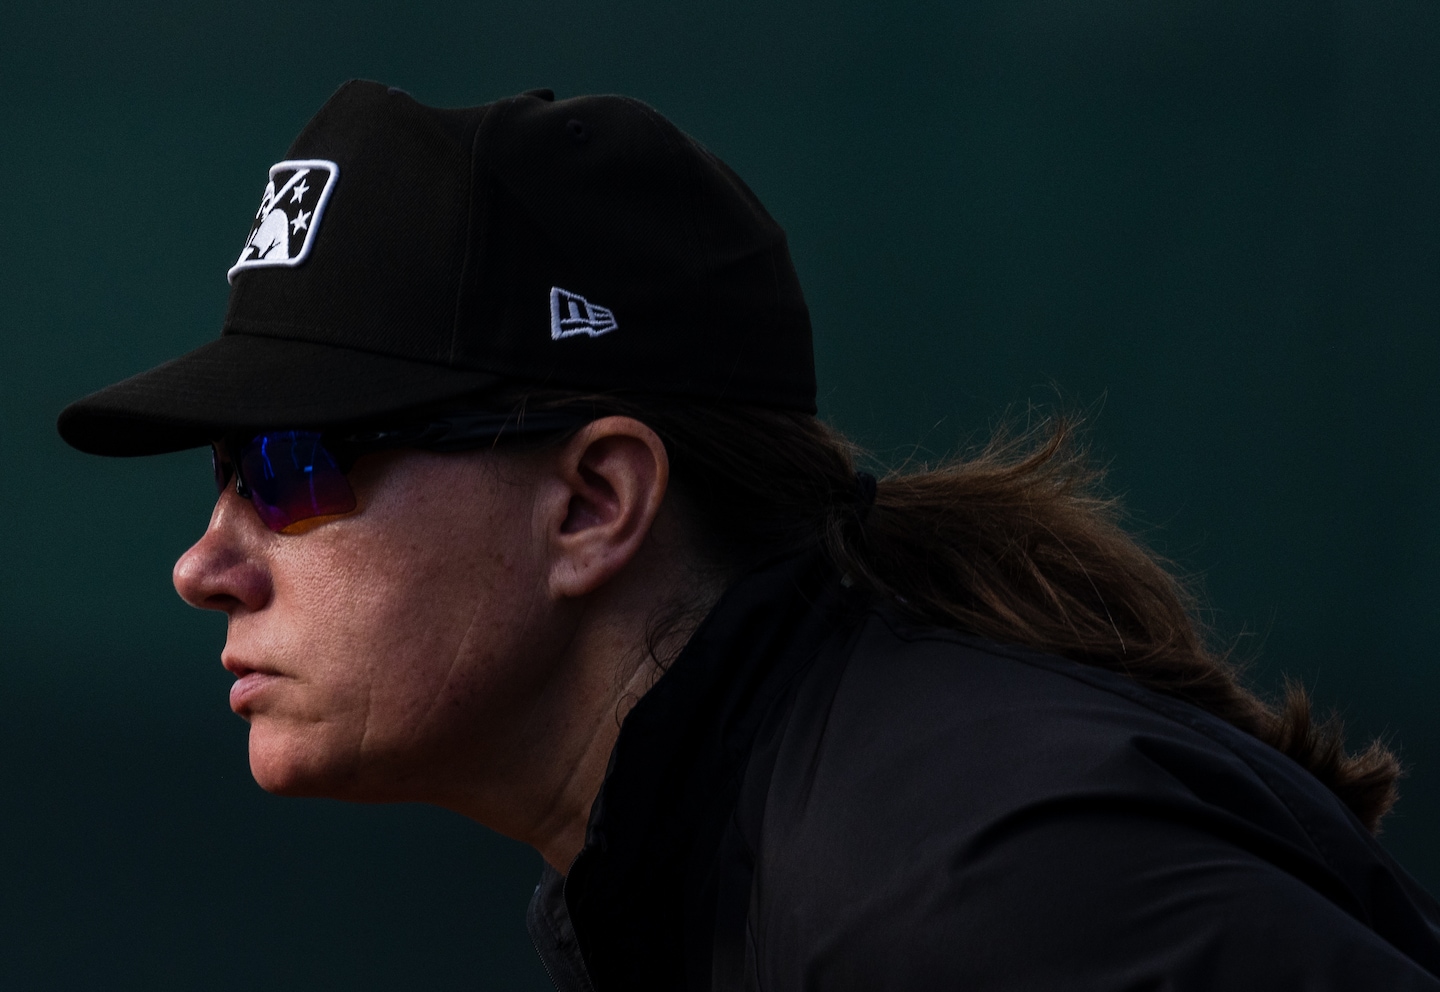 With a spring training call-up, a female umpire inches closer to history